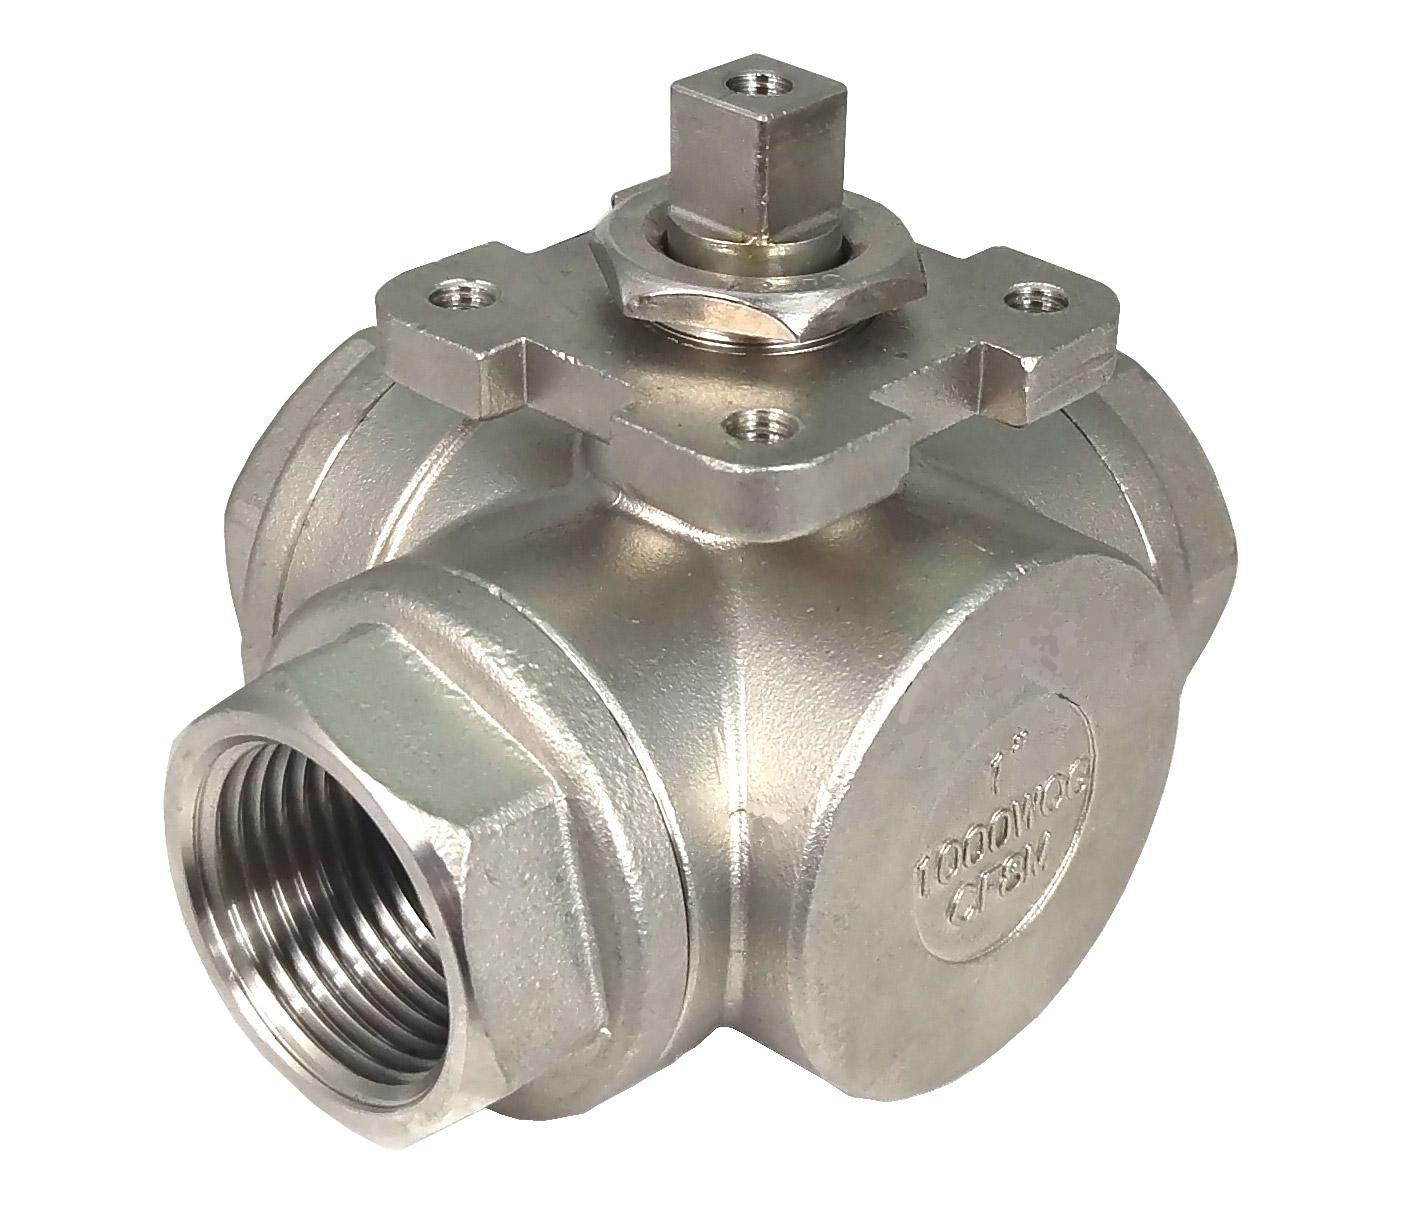 3-way ball valve, with ISO 5211 mounting pad